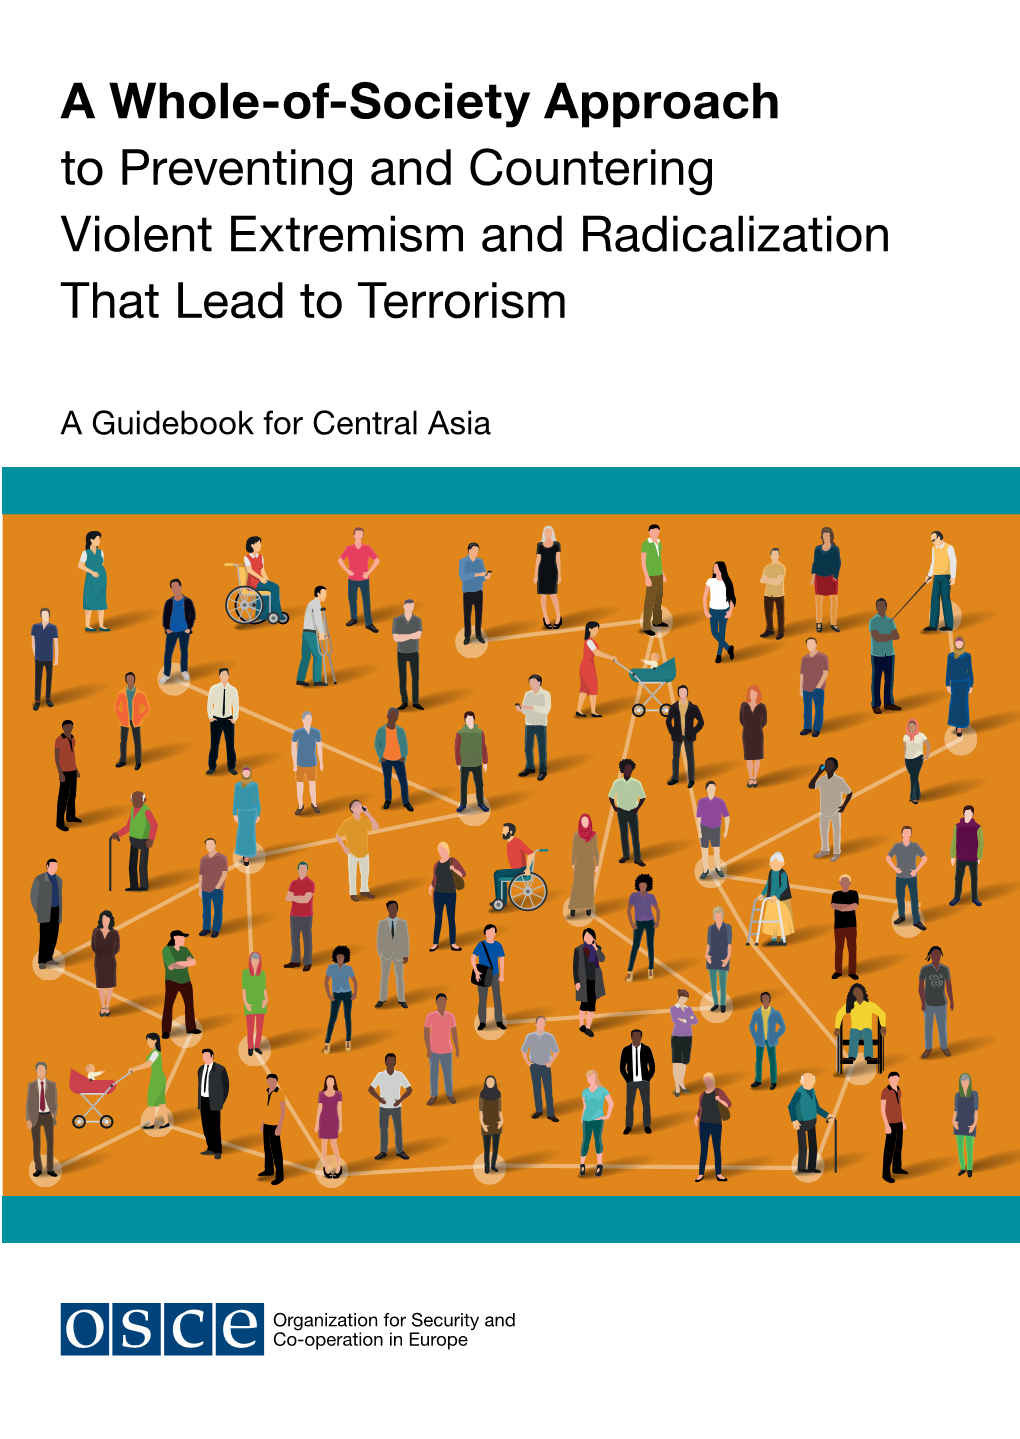 A Whole-Of-Society Approach to Preventing and Countering Violent Extremism and Radicalization That Lead to Terrorism